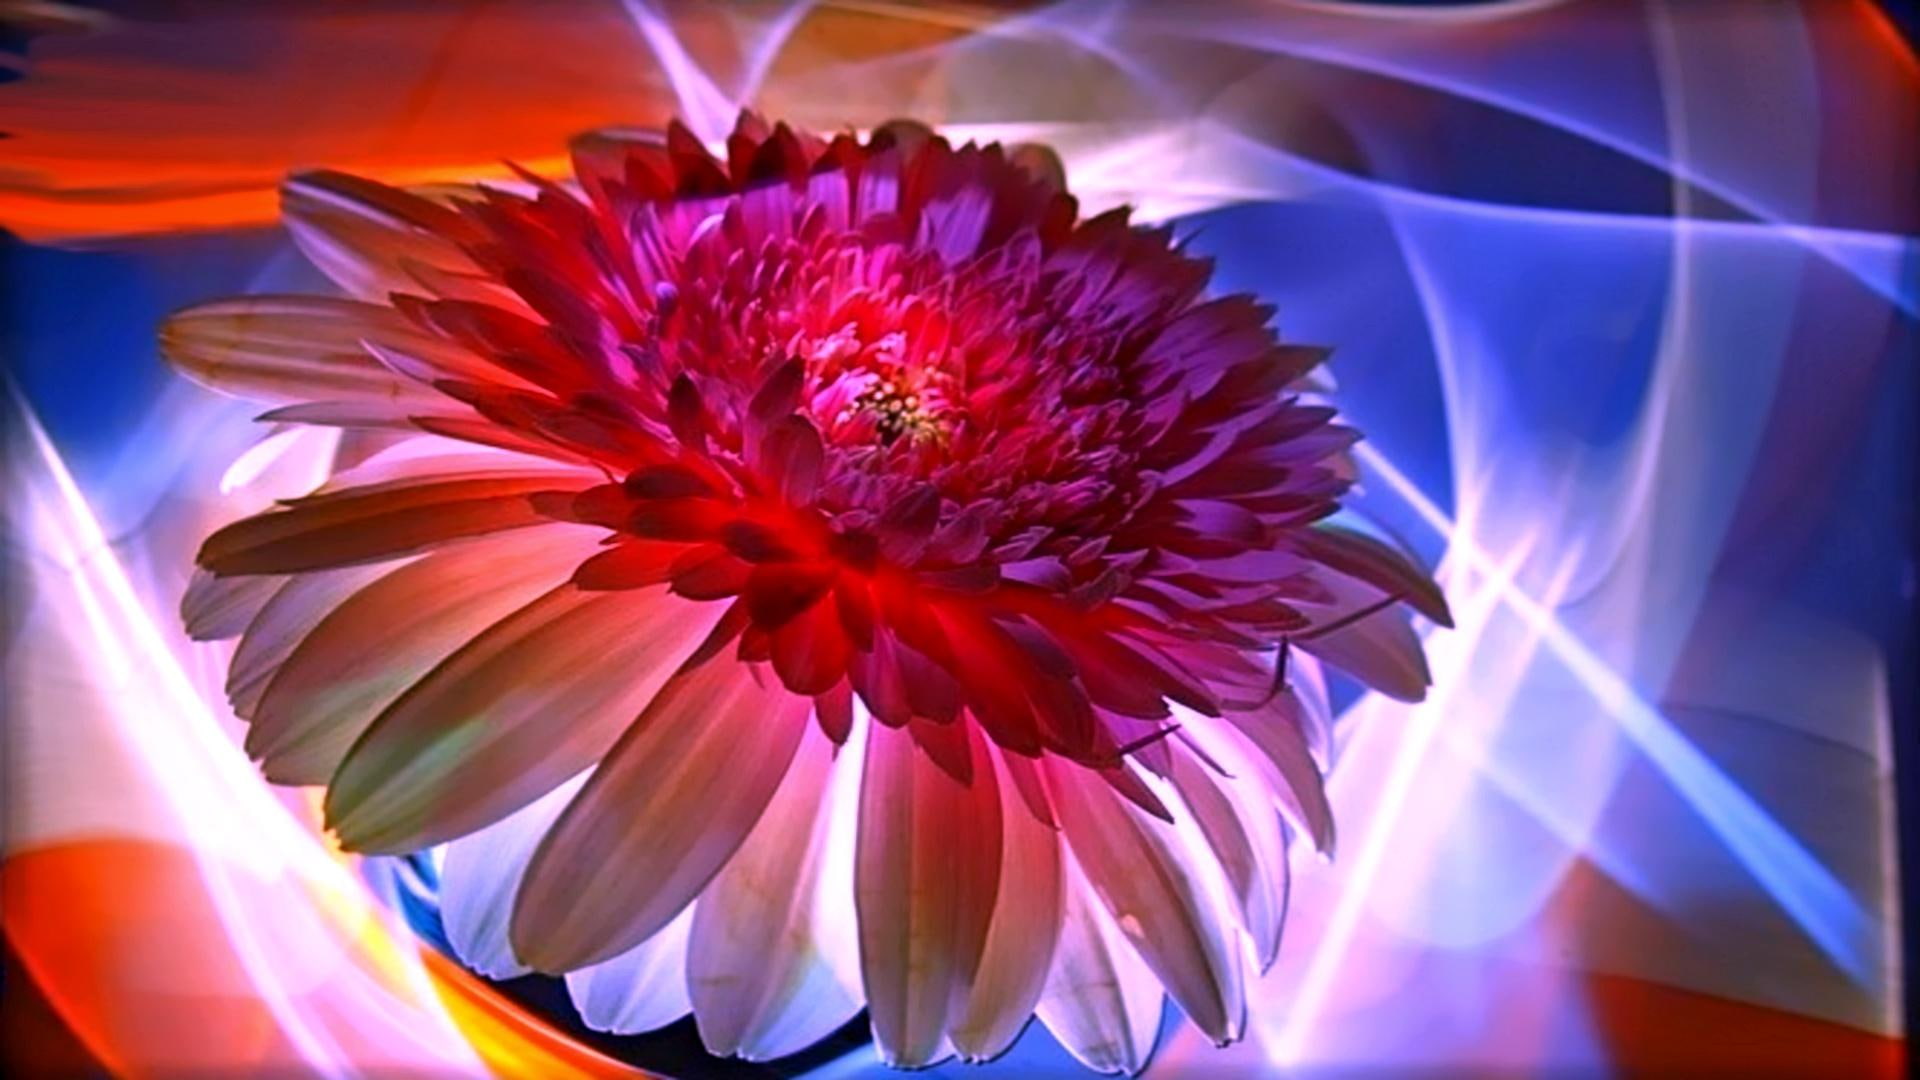 Tuesday Love, abstract, caring, romantic, colorful, loving, flower